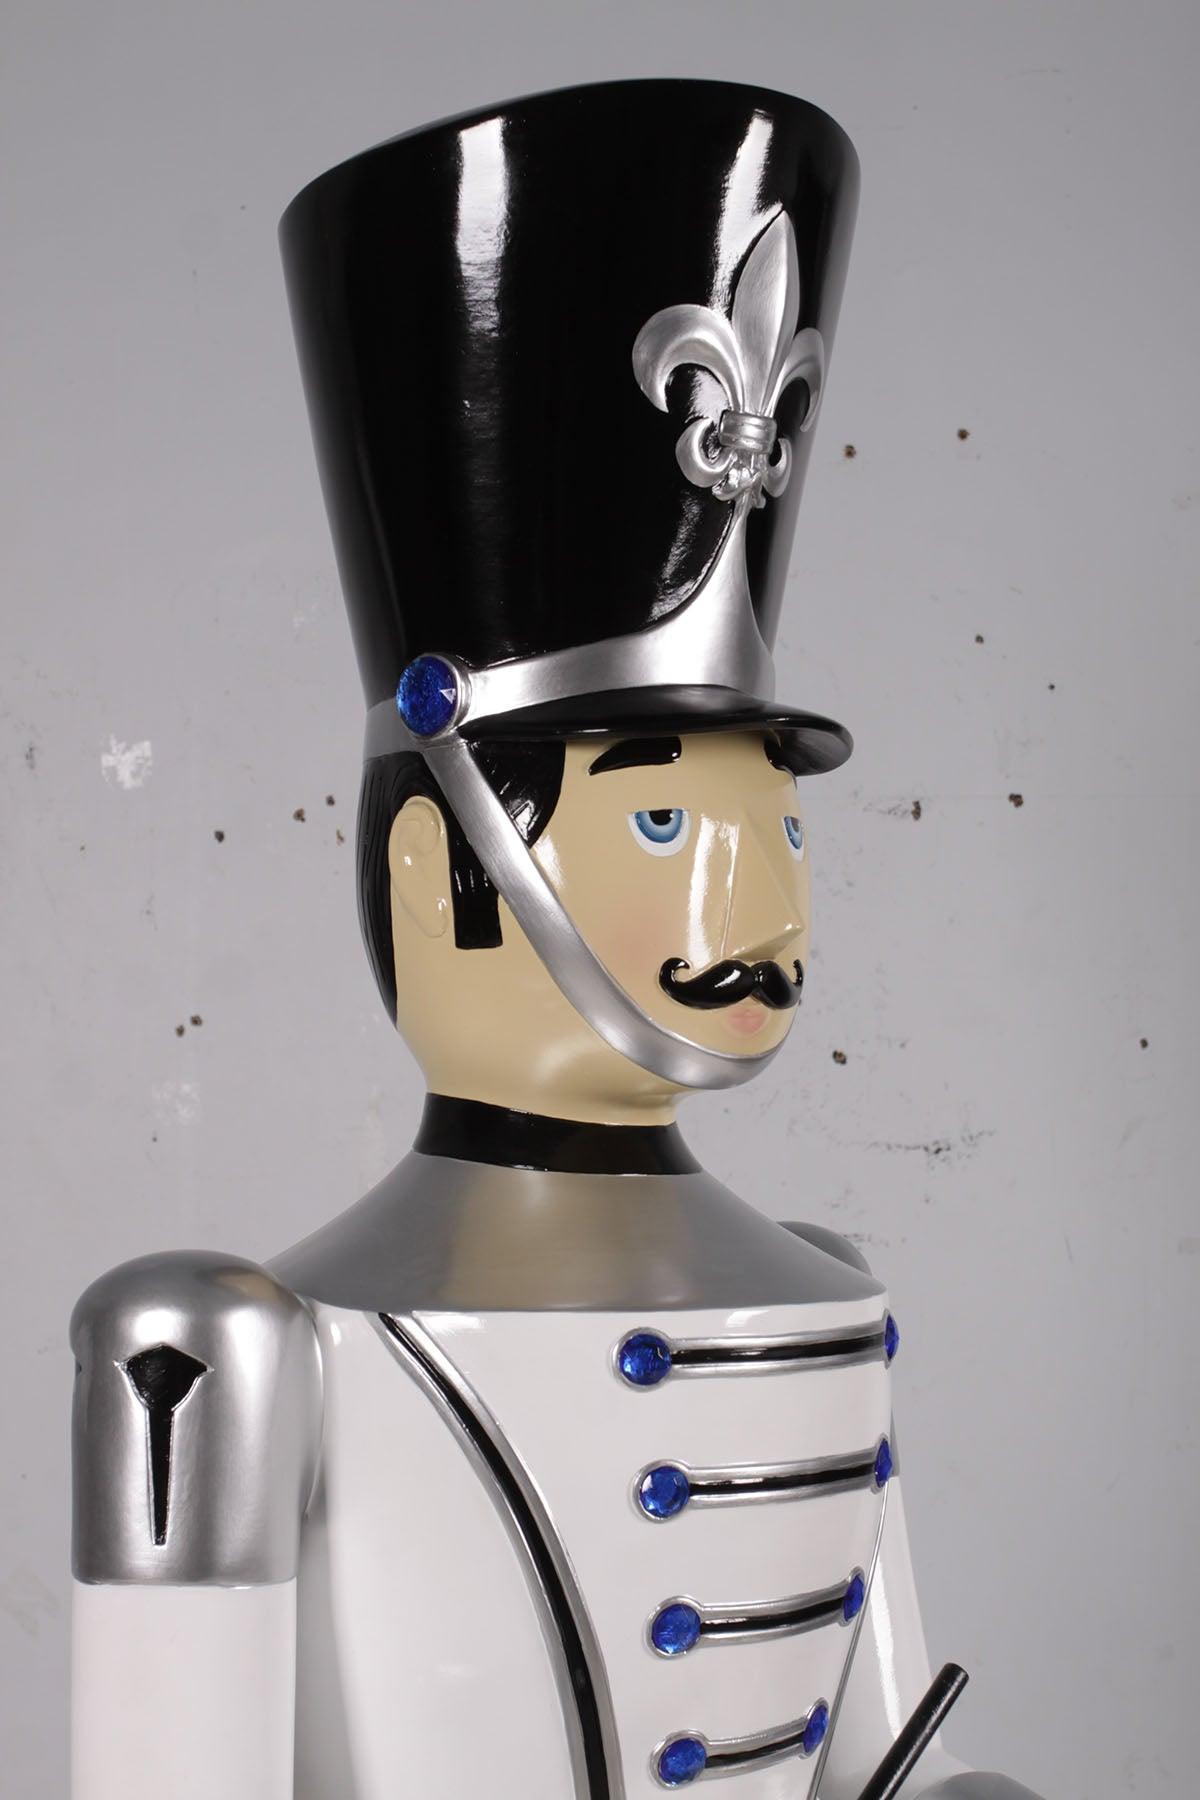 White Toy Soldier Drummer Life Size Christmas Statue